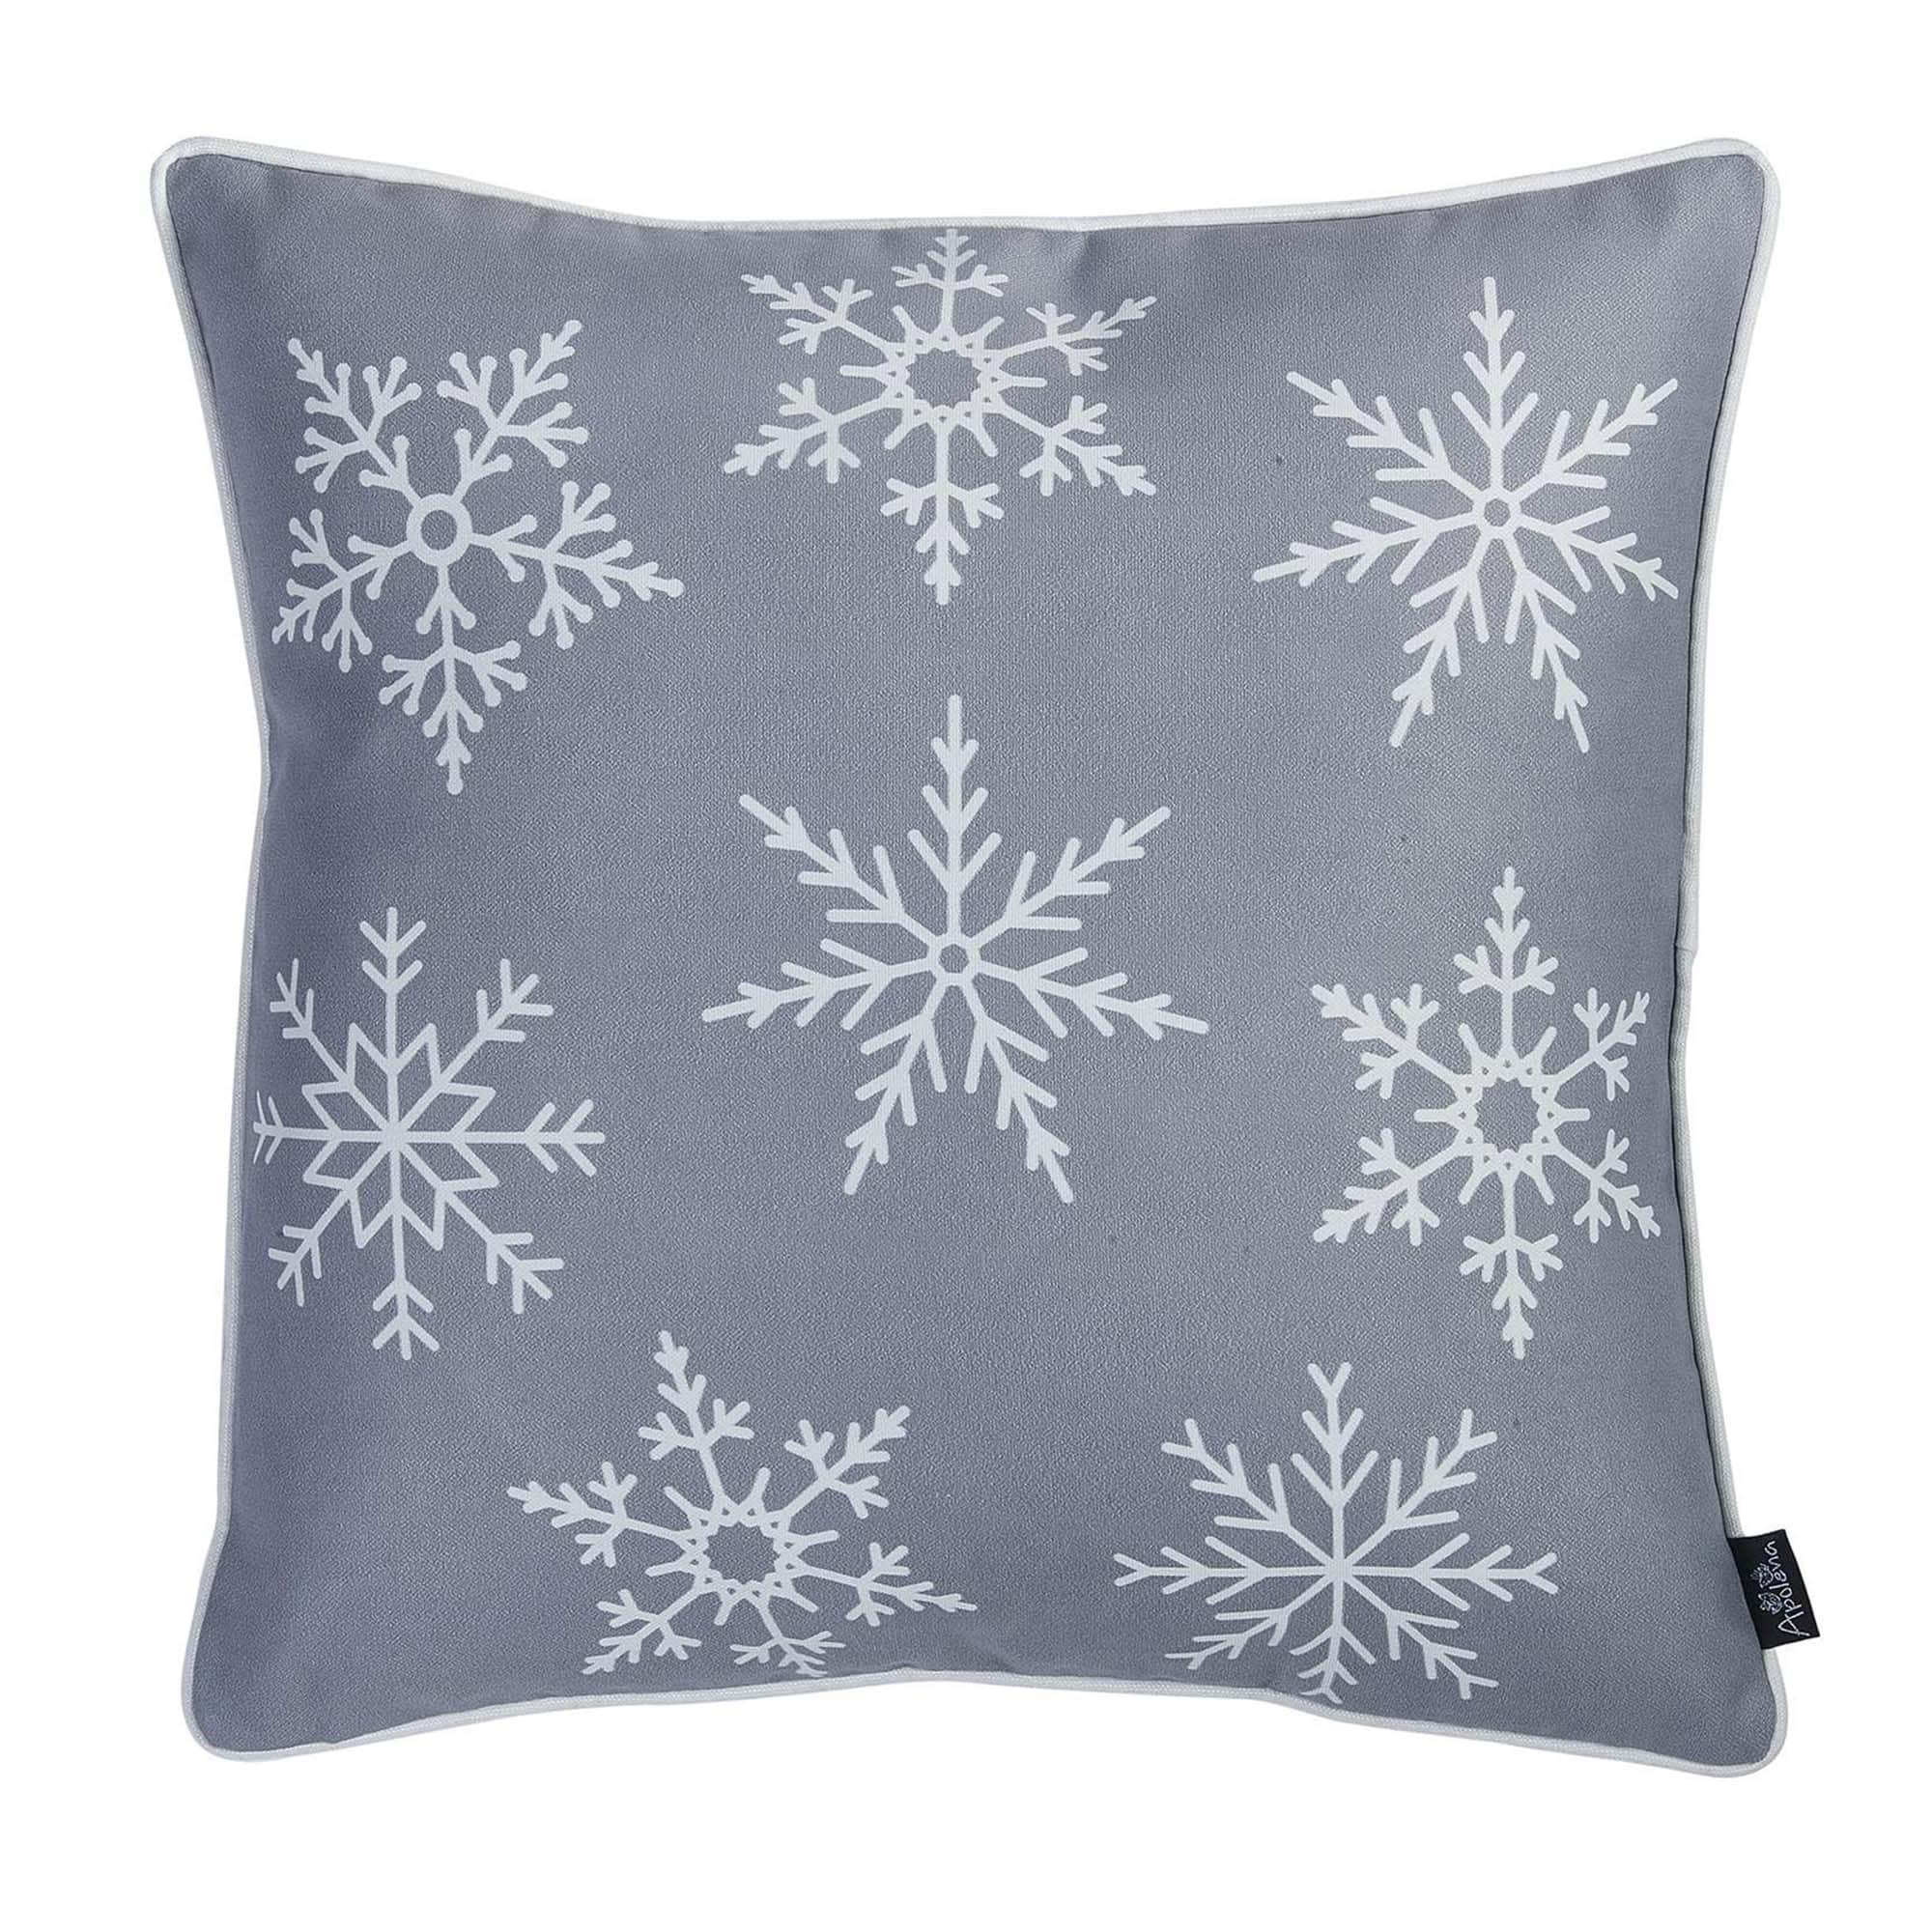 https://ak1.ostkcdn.com/images/products/is/images/direct/e7e2b1981e8d3a10397cd623db6ae5c936d595bb/Decorative-Christmas-Snowflakes-Single-Throw-Pillow-Cover-Square.jpg